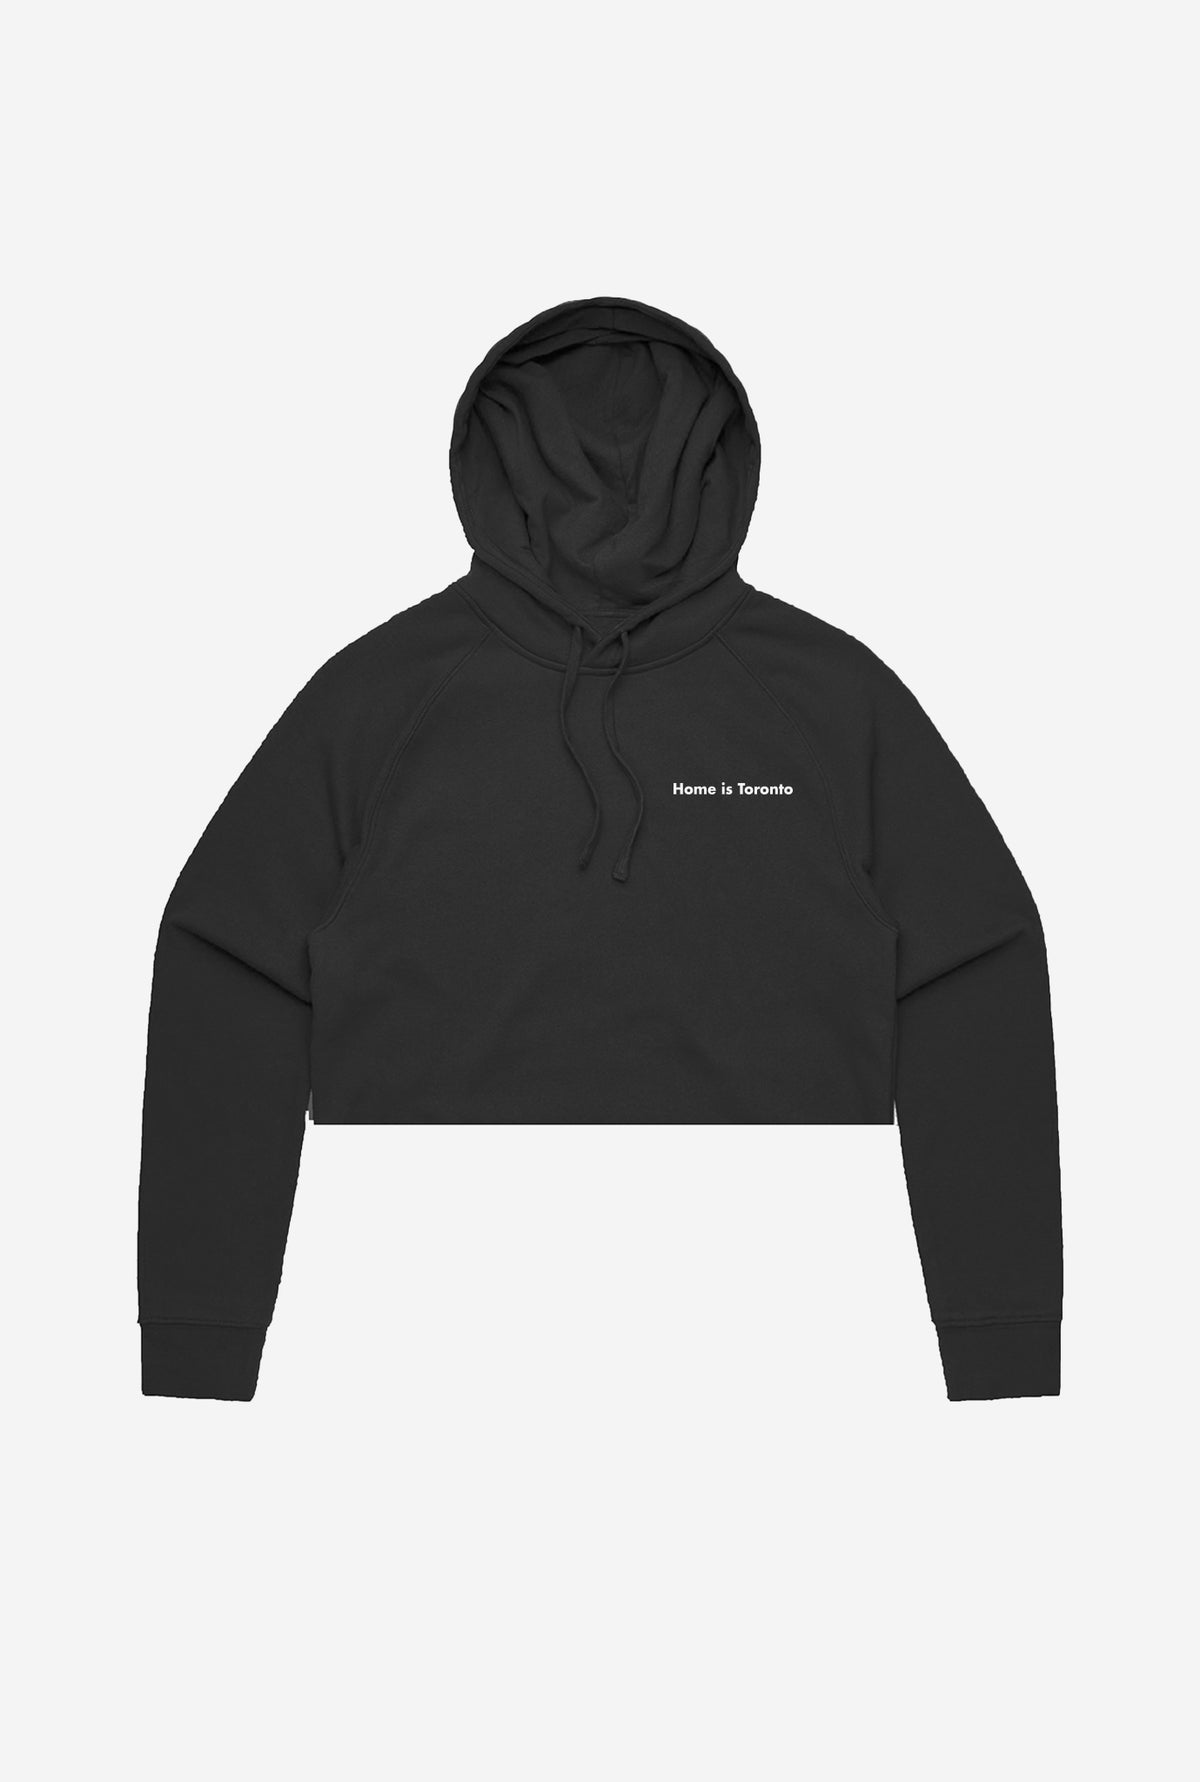 Home is Toronto Cropped French Terry Hoodie - Black